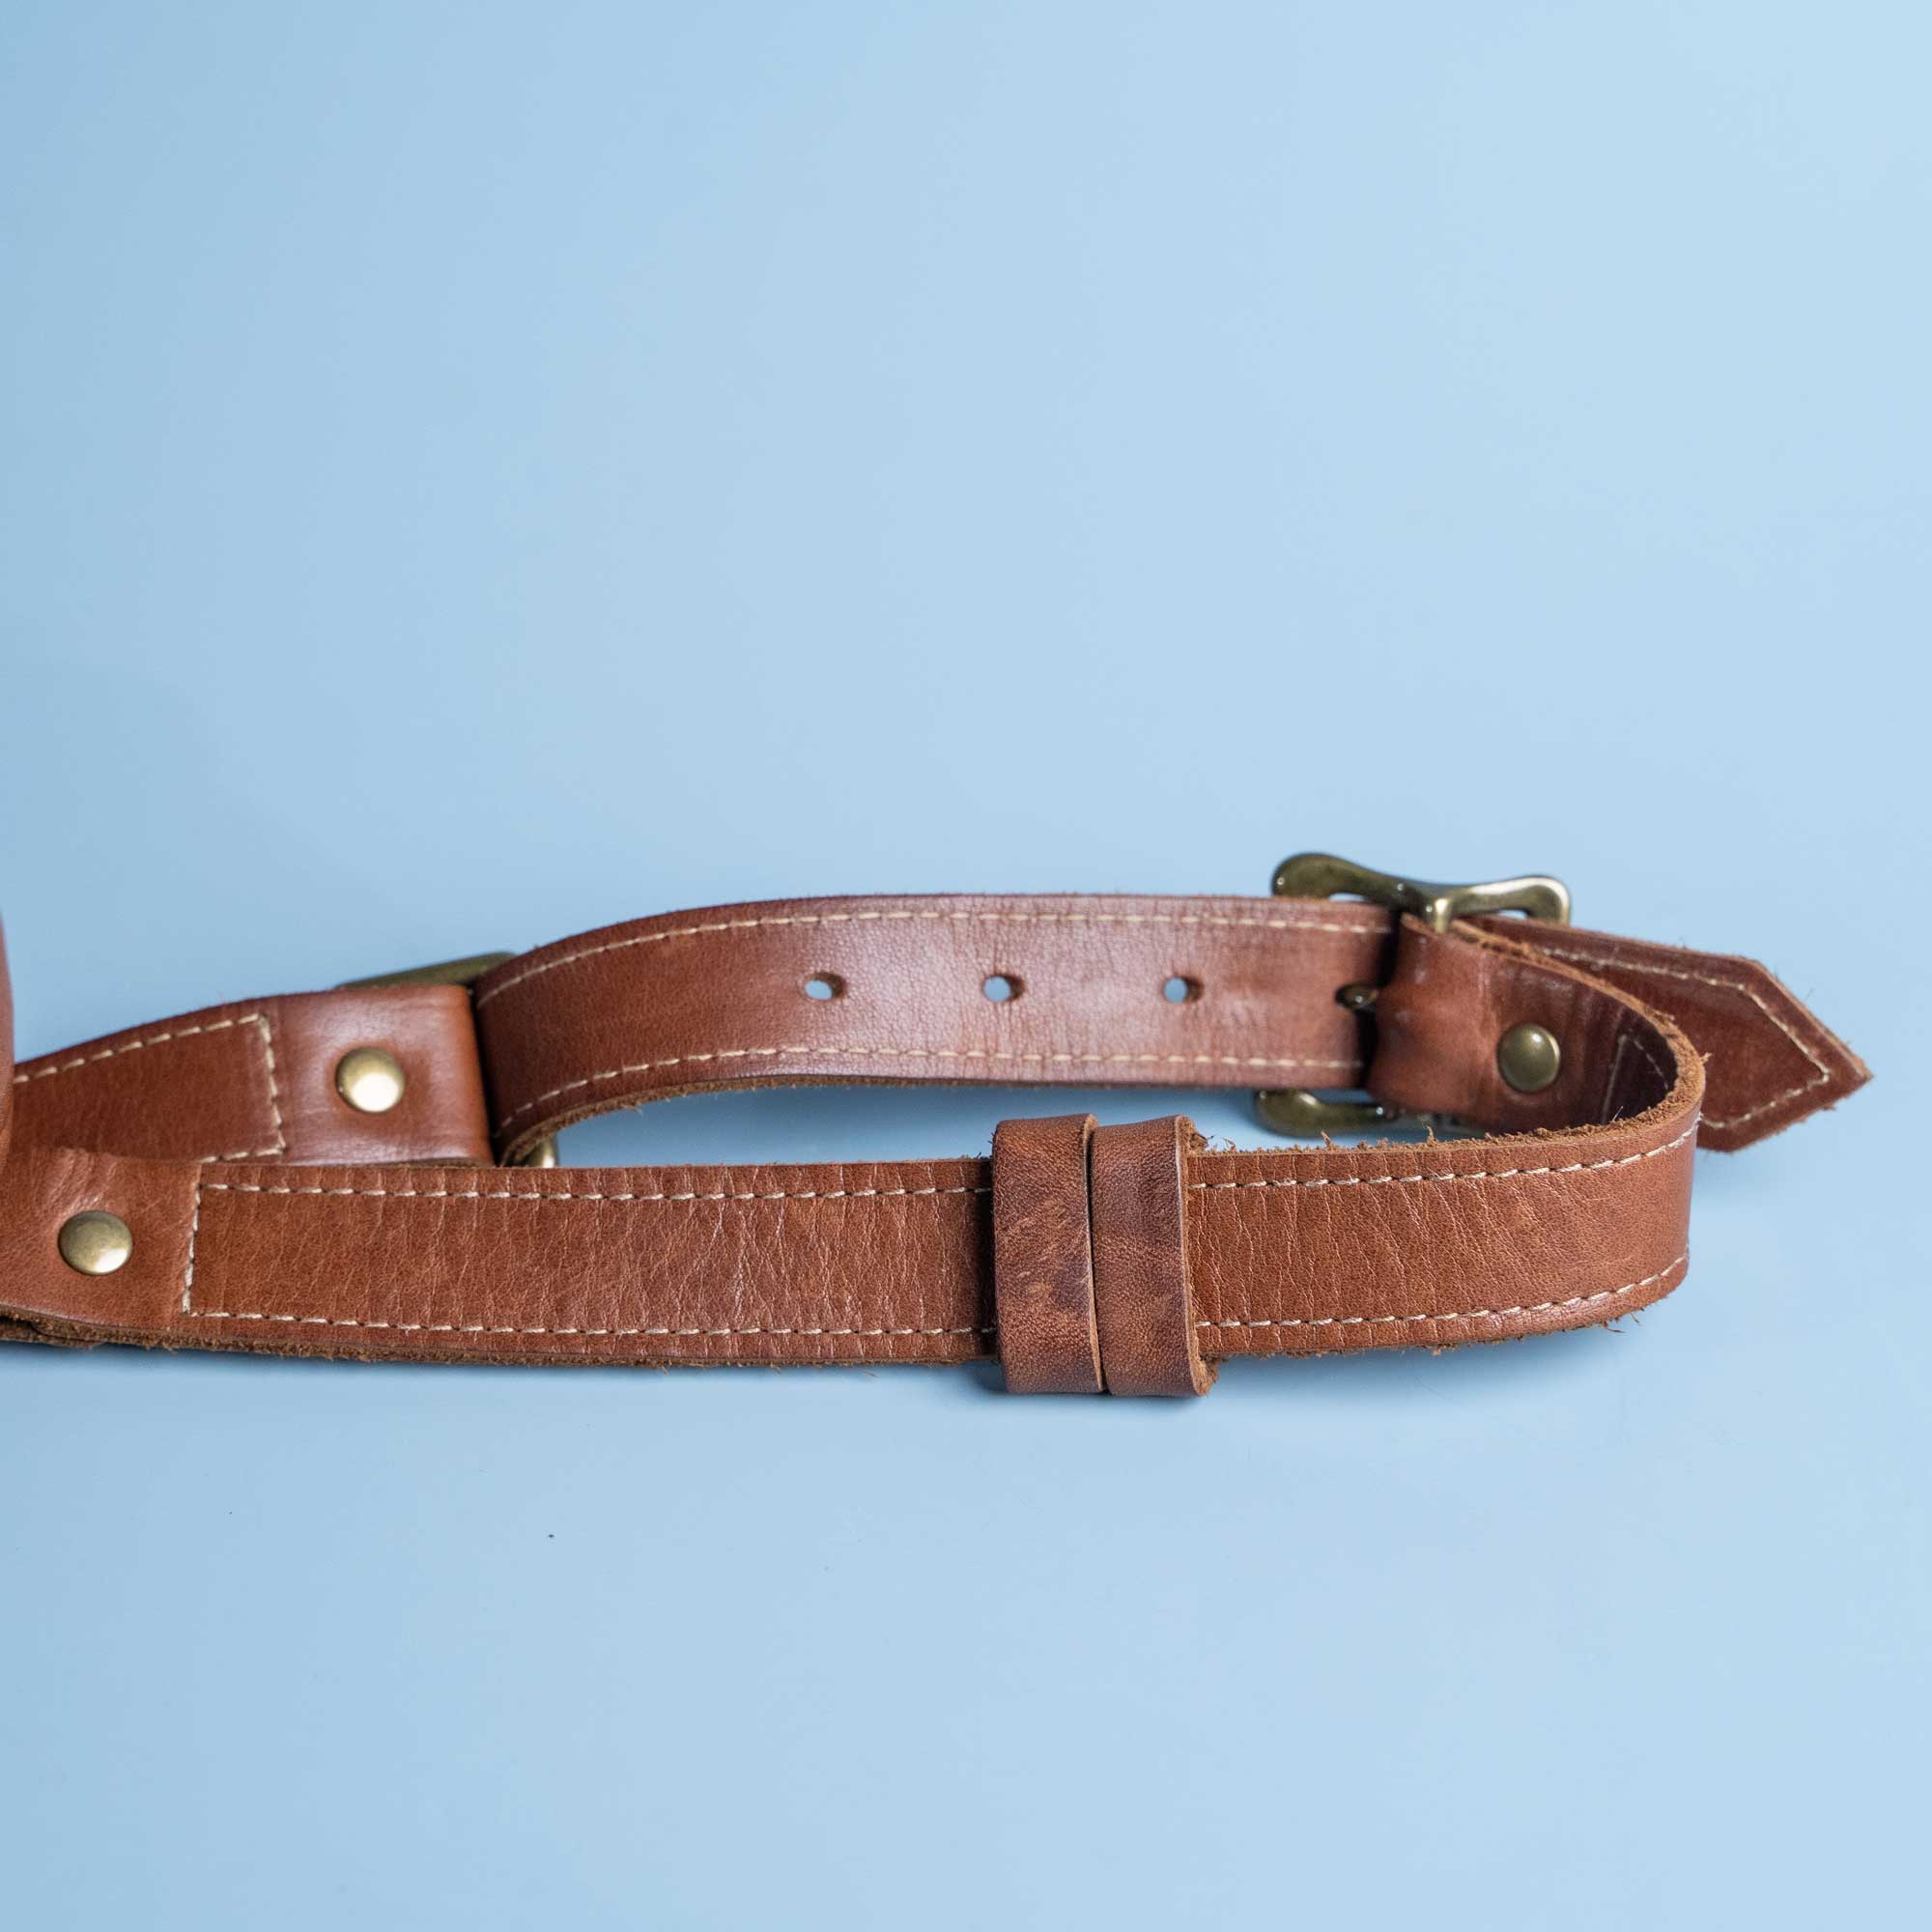 The Sage Crossbody Fanny Pack Bag - Holtz Leather